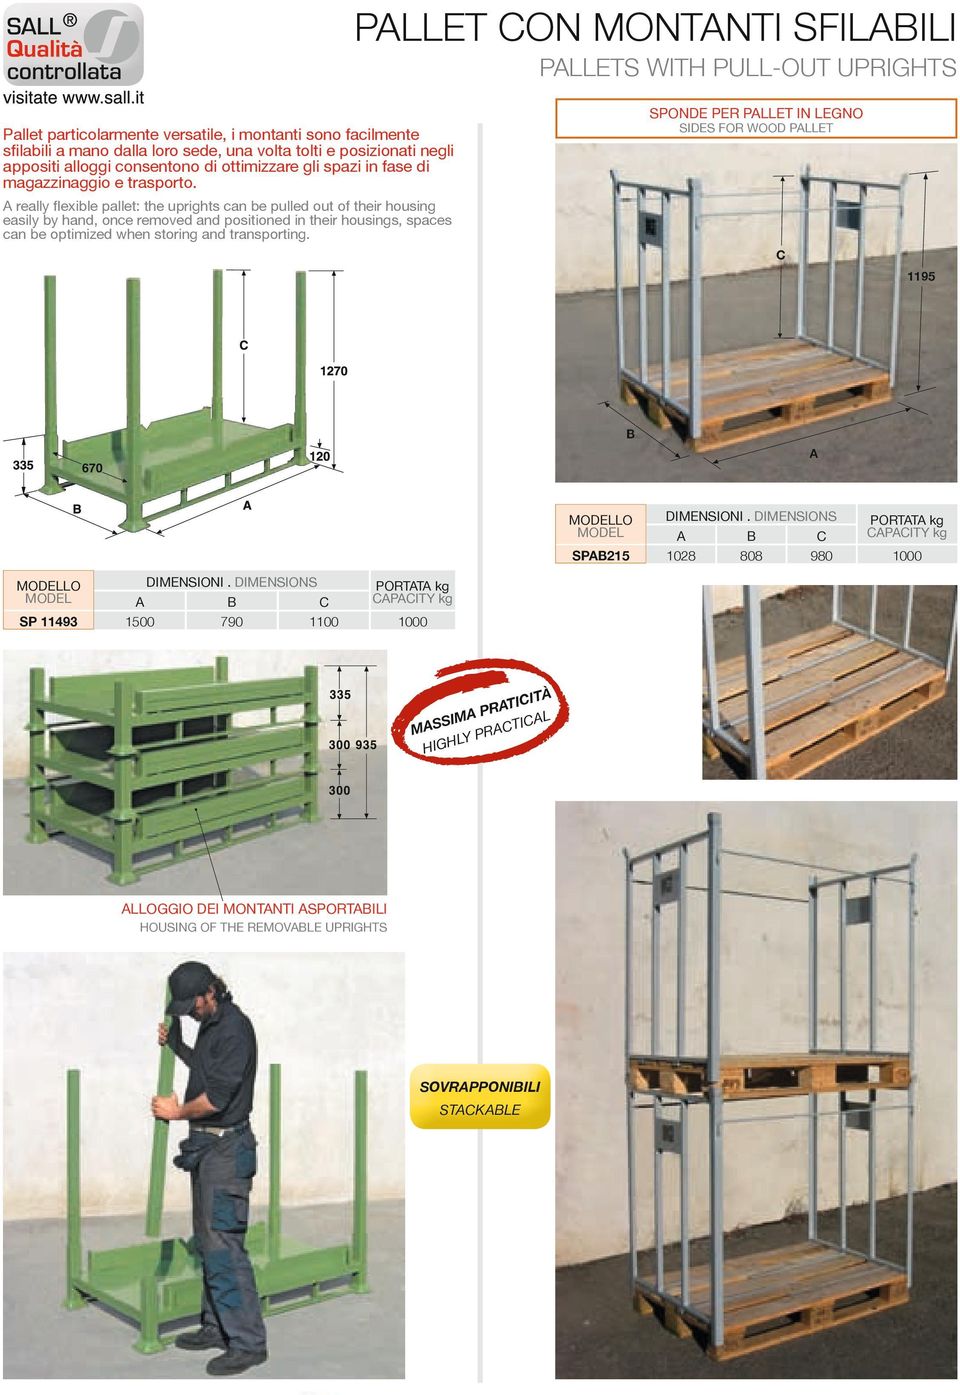 really flexible pallet: the uprights can be pulled out of their housing easily by hand, once removed and positioned in their housings, spaces can be optimized when storing and transporting.